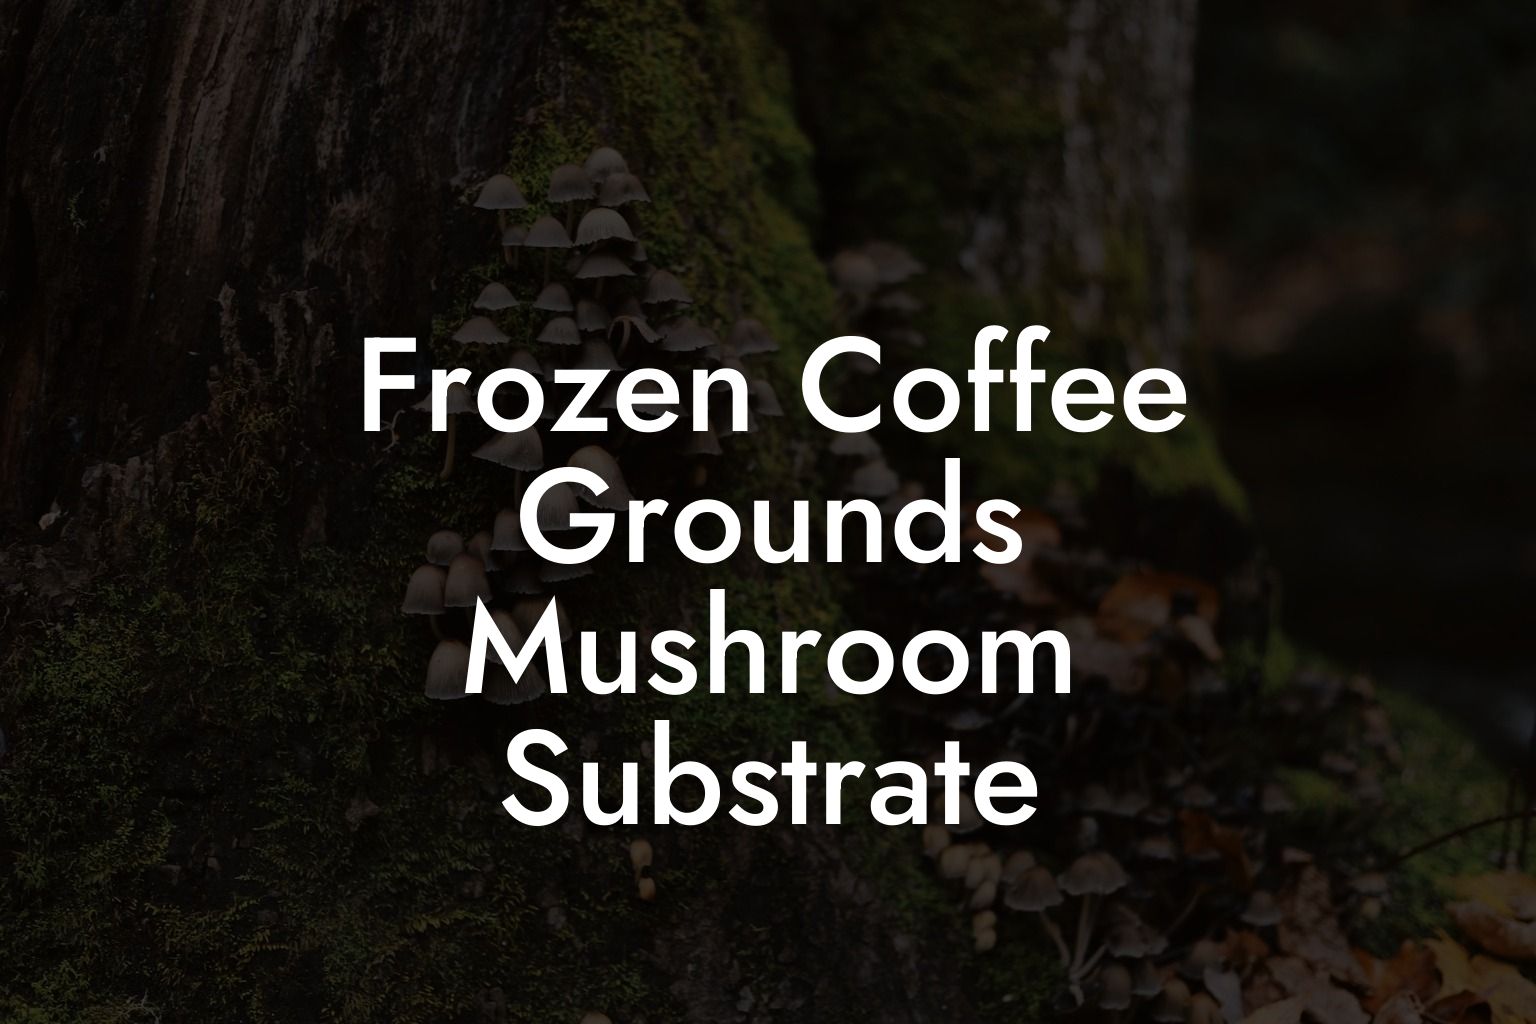 Frozen Coffee Grounds Mushroom Substrate